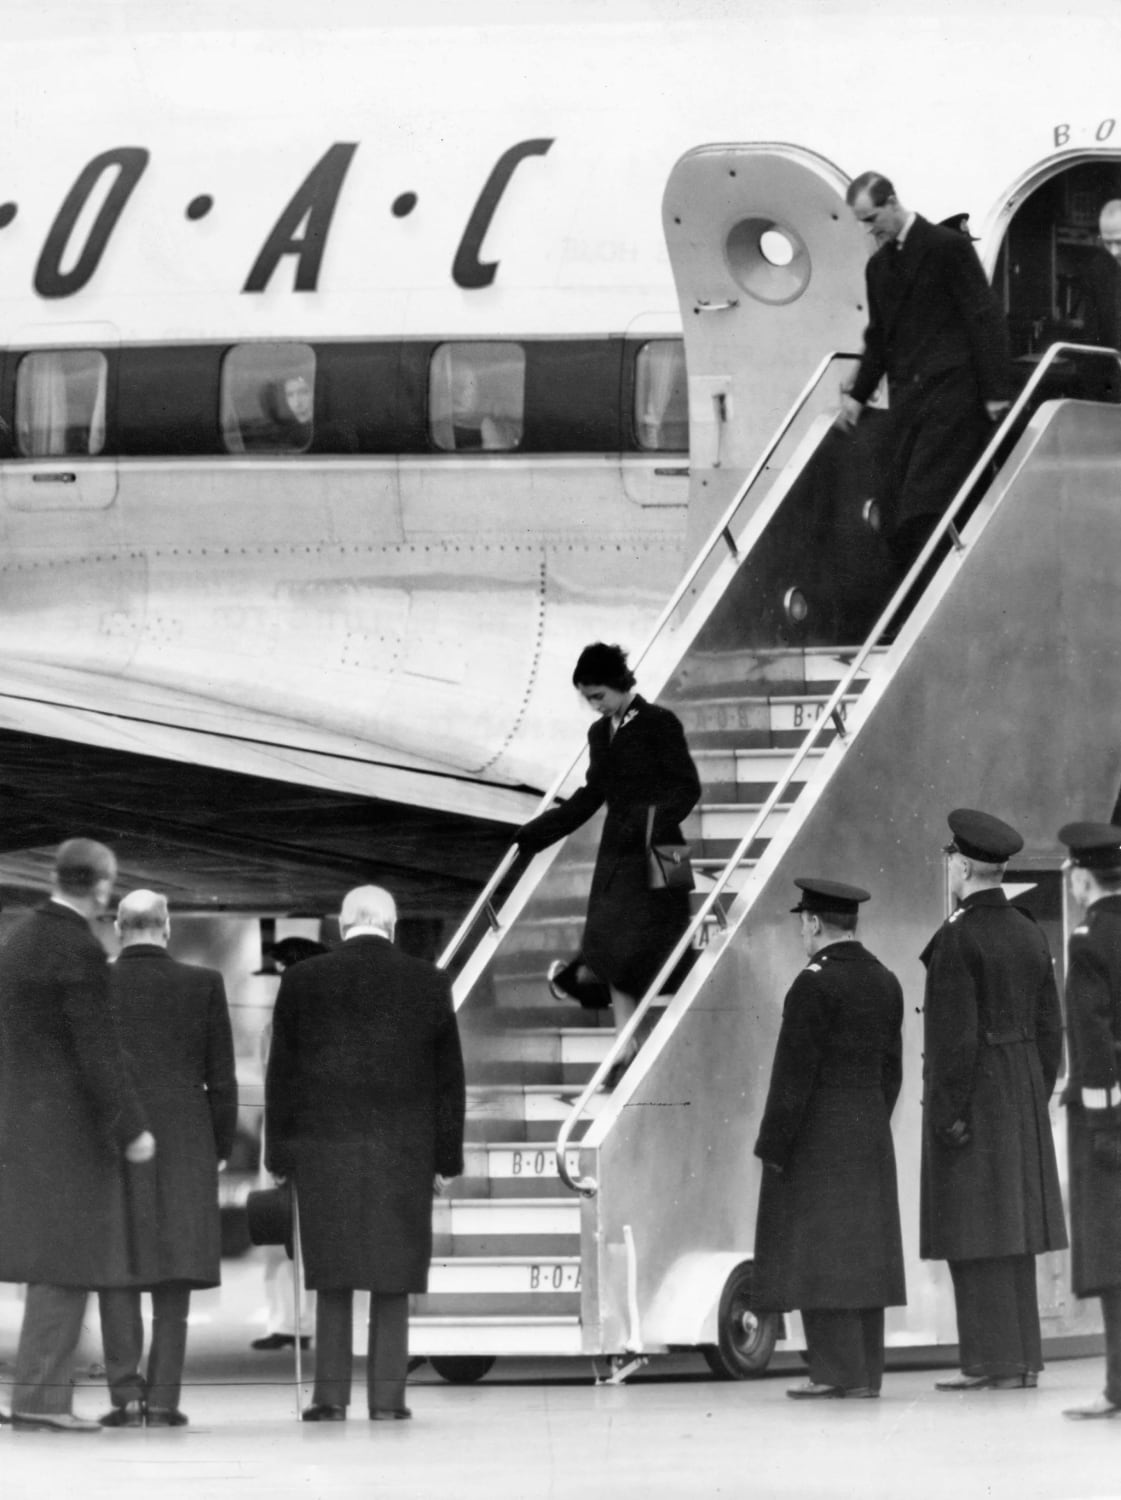 Princess Elizabeth sets foot in the United Kingdom for the first time as Queen Elizabeth II, arriving from Kenya at London Airport. Greeted amongst others by Winston Churchill and Clement Attlee. [February 7 1952 |